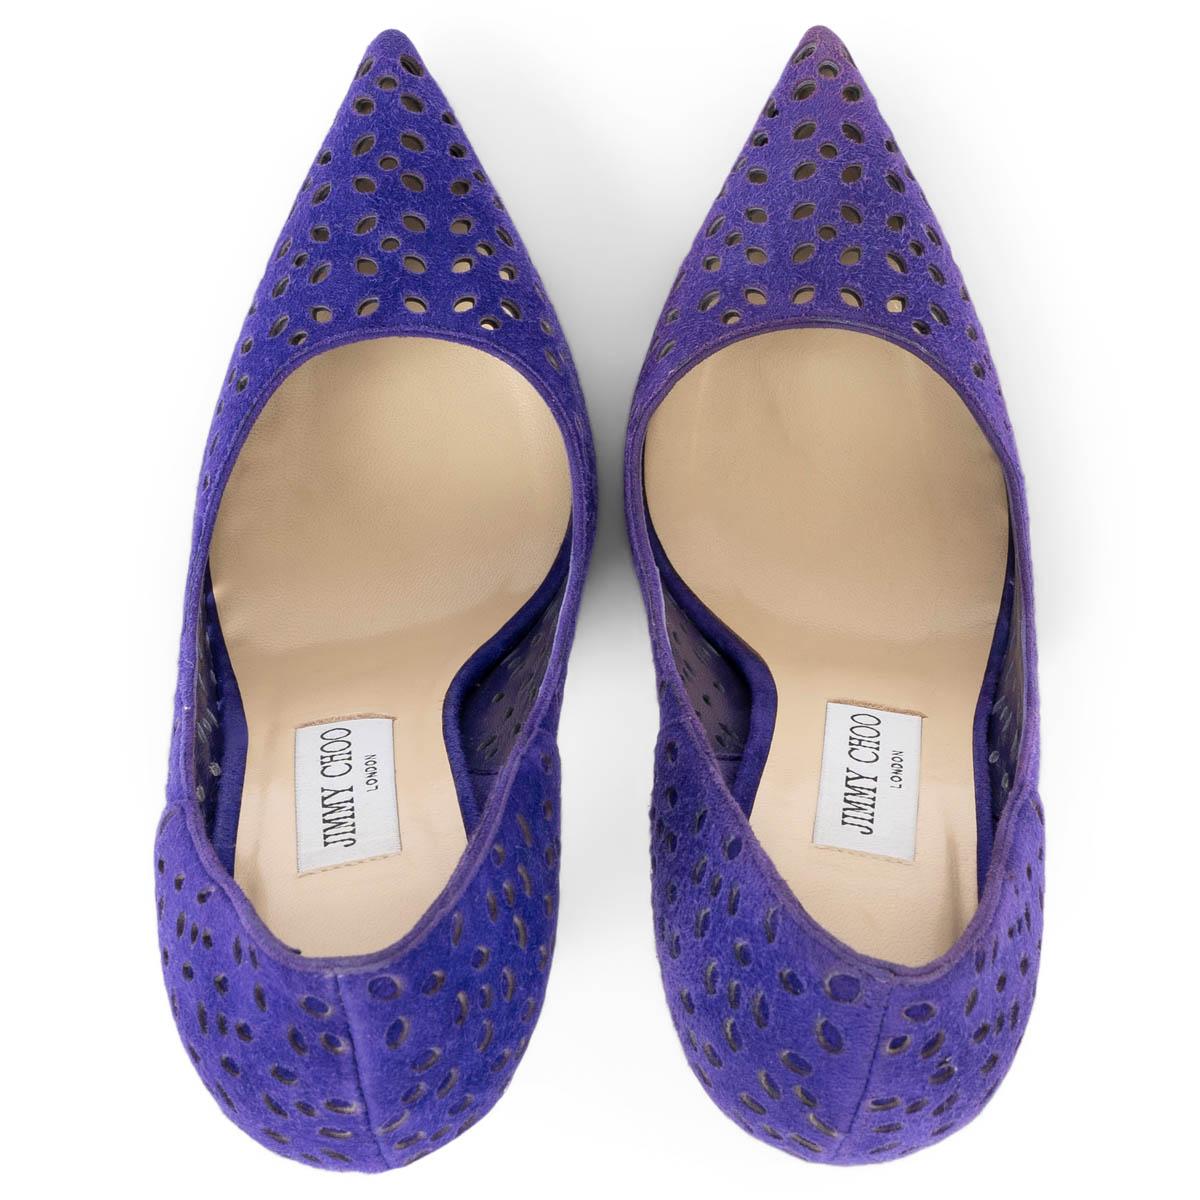 JIMMY CHOO purple suede PERFORATED ANOUK Pumps Shoes 37.5 For Sale 1